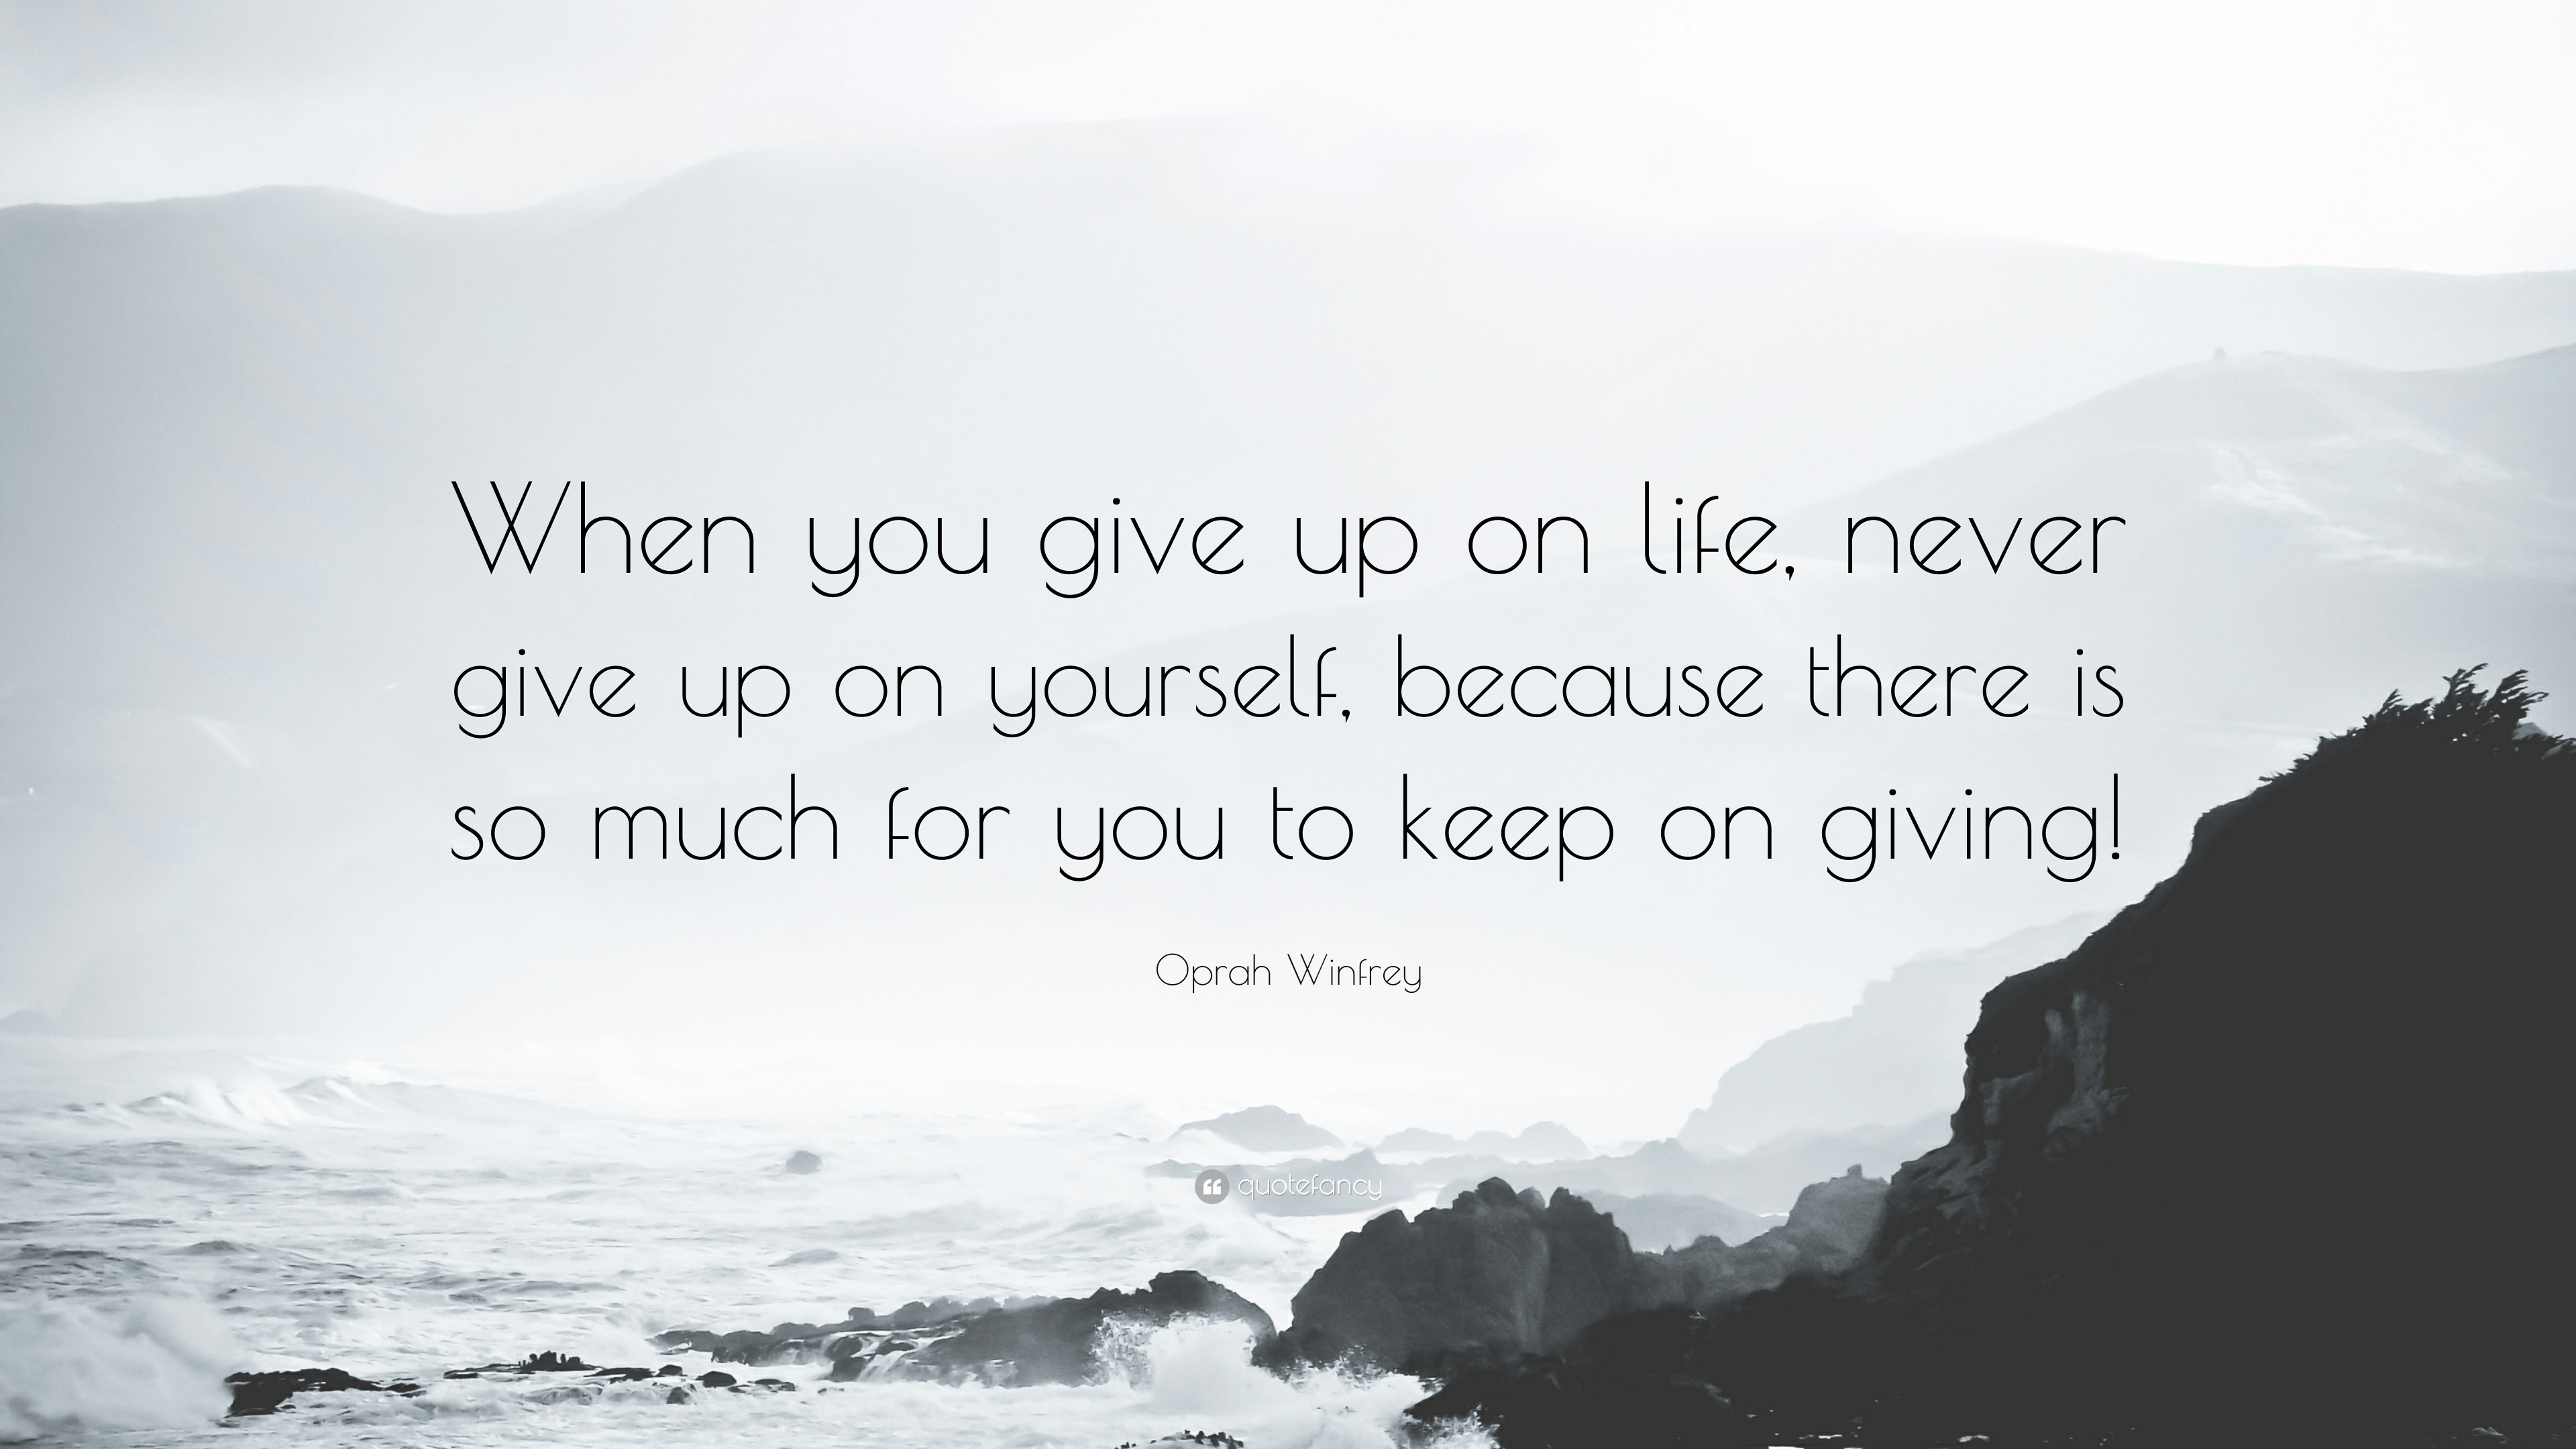 Quotes About Giving Up On Life
 Oprah Winfrey Quote “When you give up on life never give